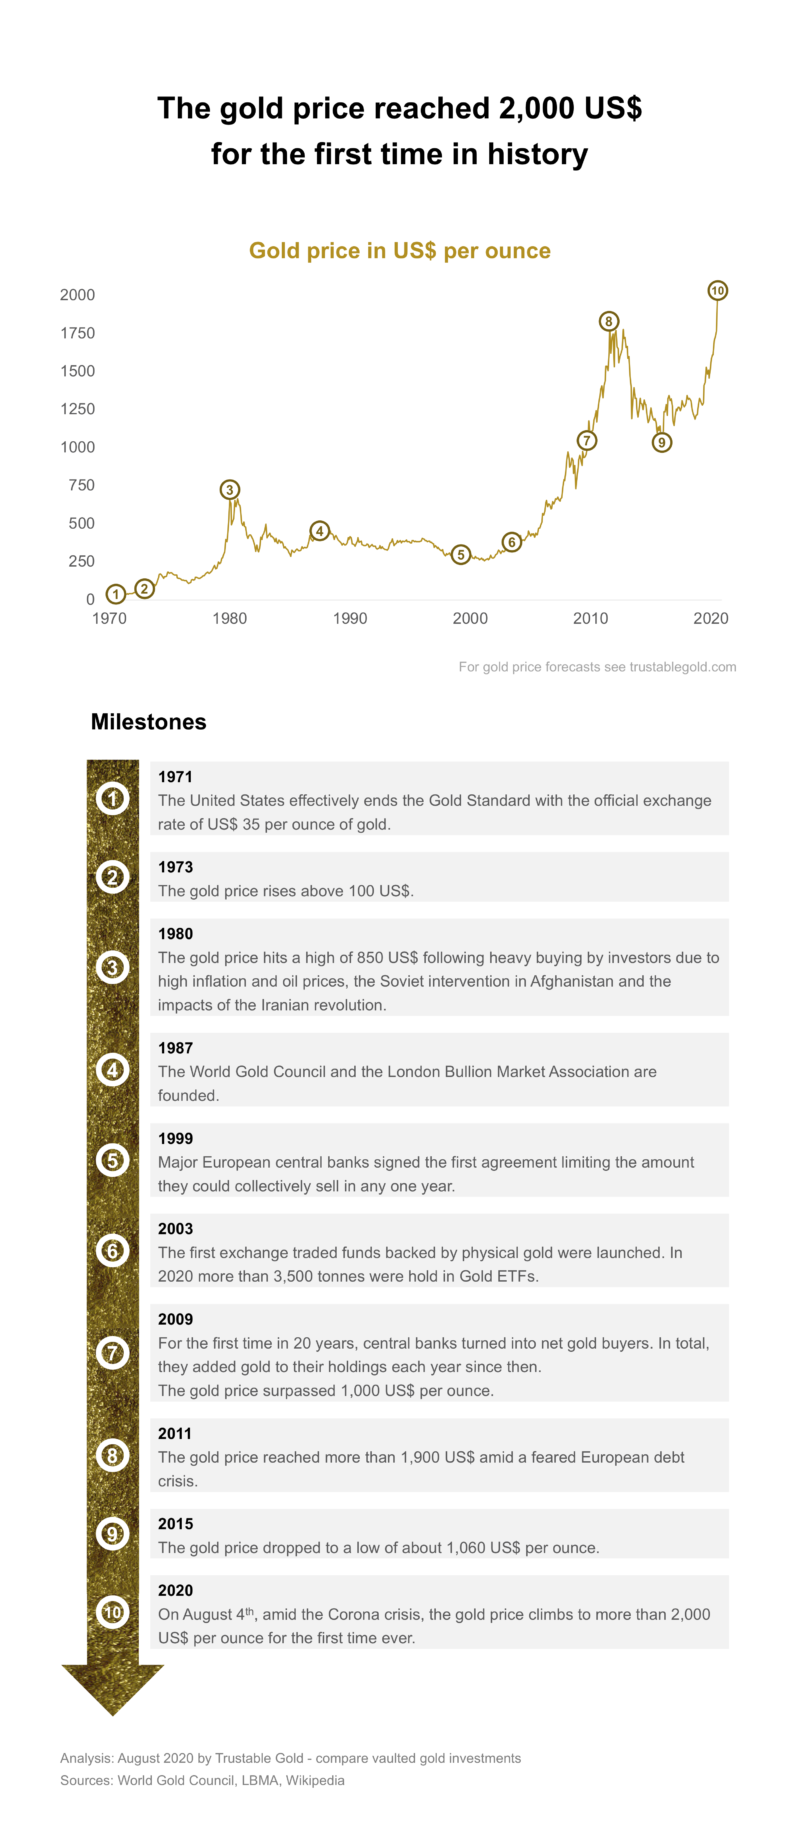 Infographic showing the milestones of the price of gold after exceeding USD 2000 for the first time in history